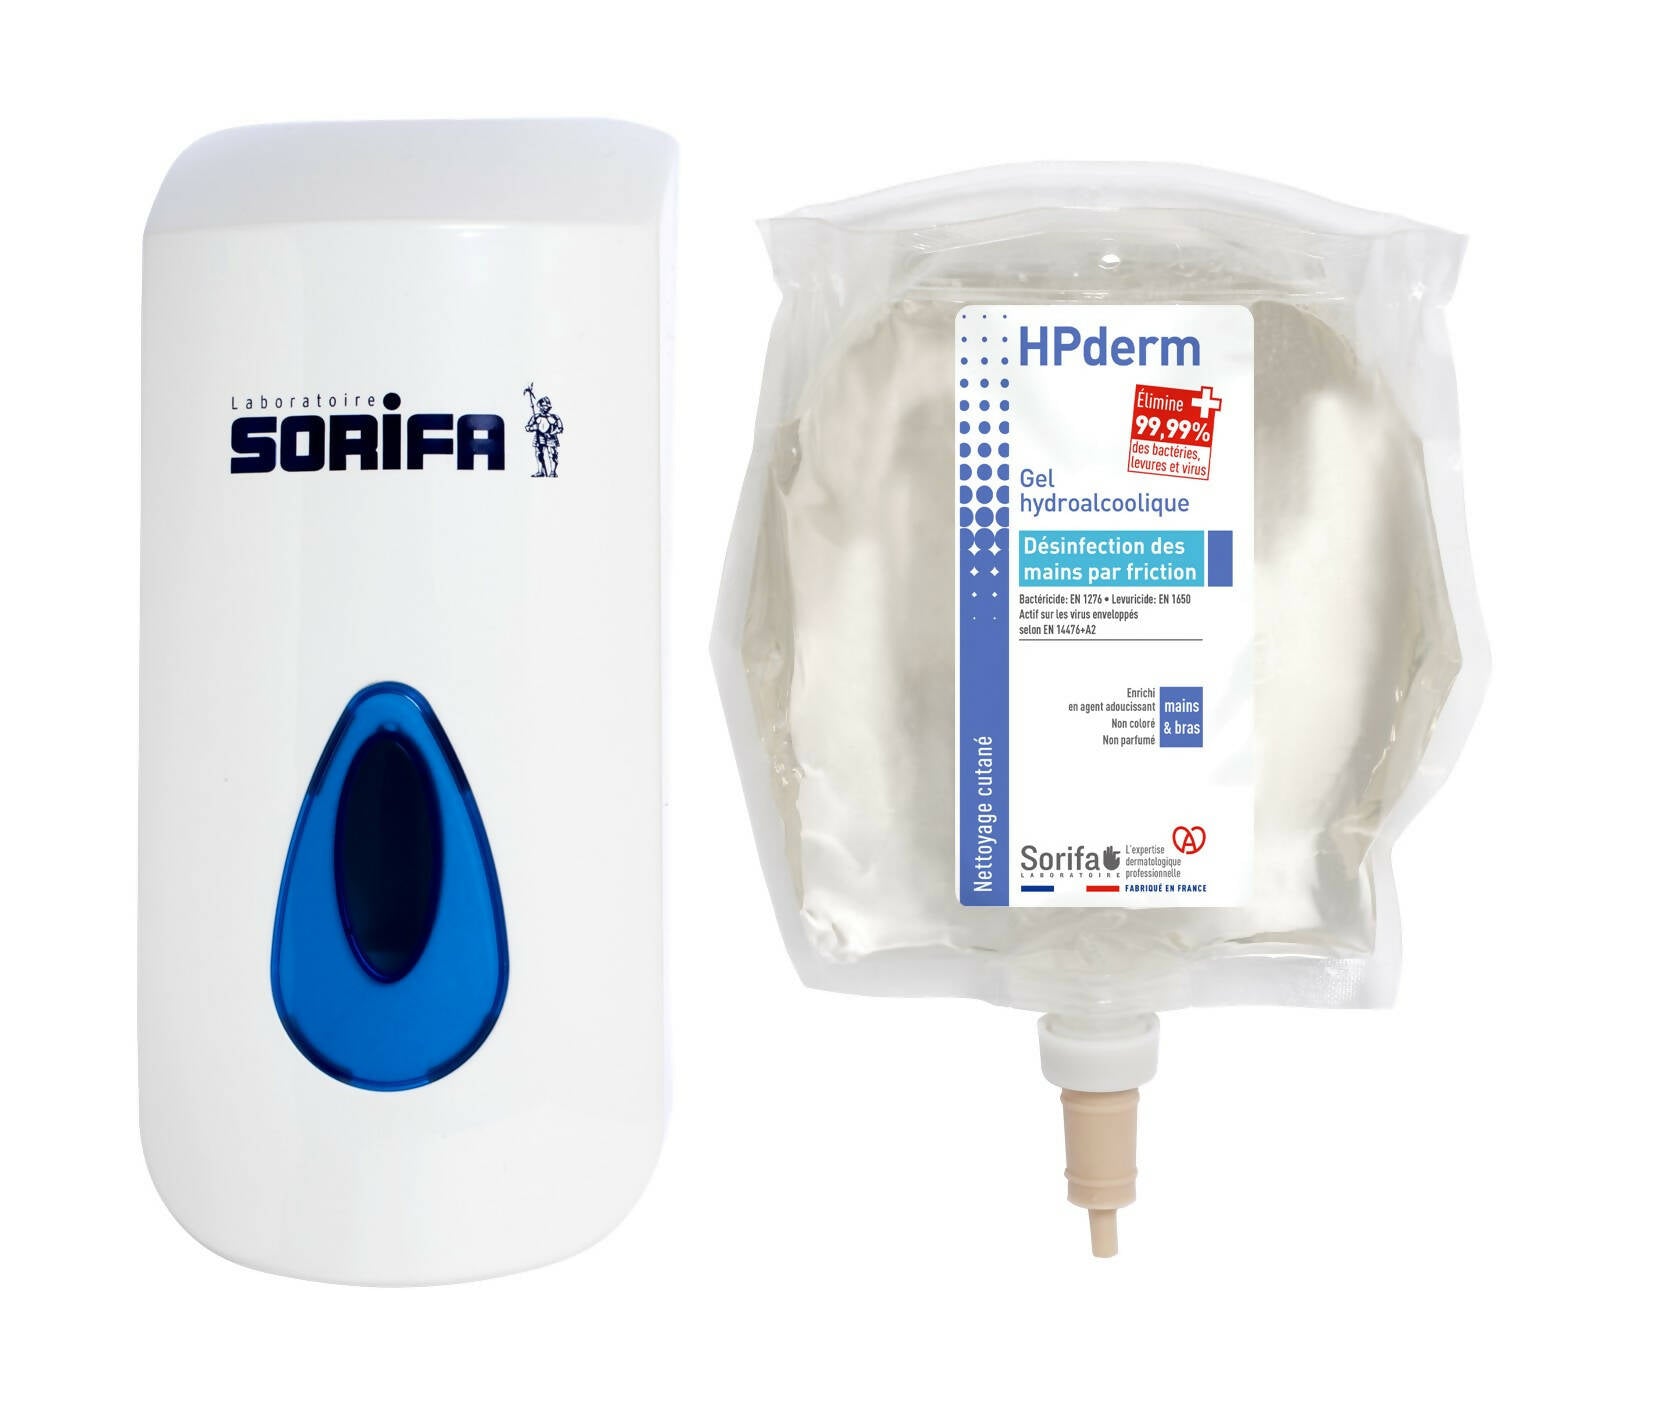 SORIFA - Pack of 6 - HPderm Hydroalcoholic Gel - Hand disinfection by friction - Hands, arms - Enriched with glycerin - Fragrance-free - 800 ml bag for SORIBAG wall dispenser